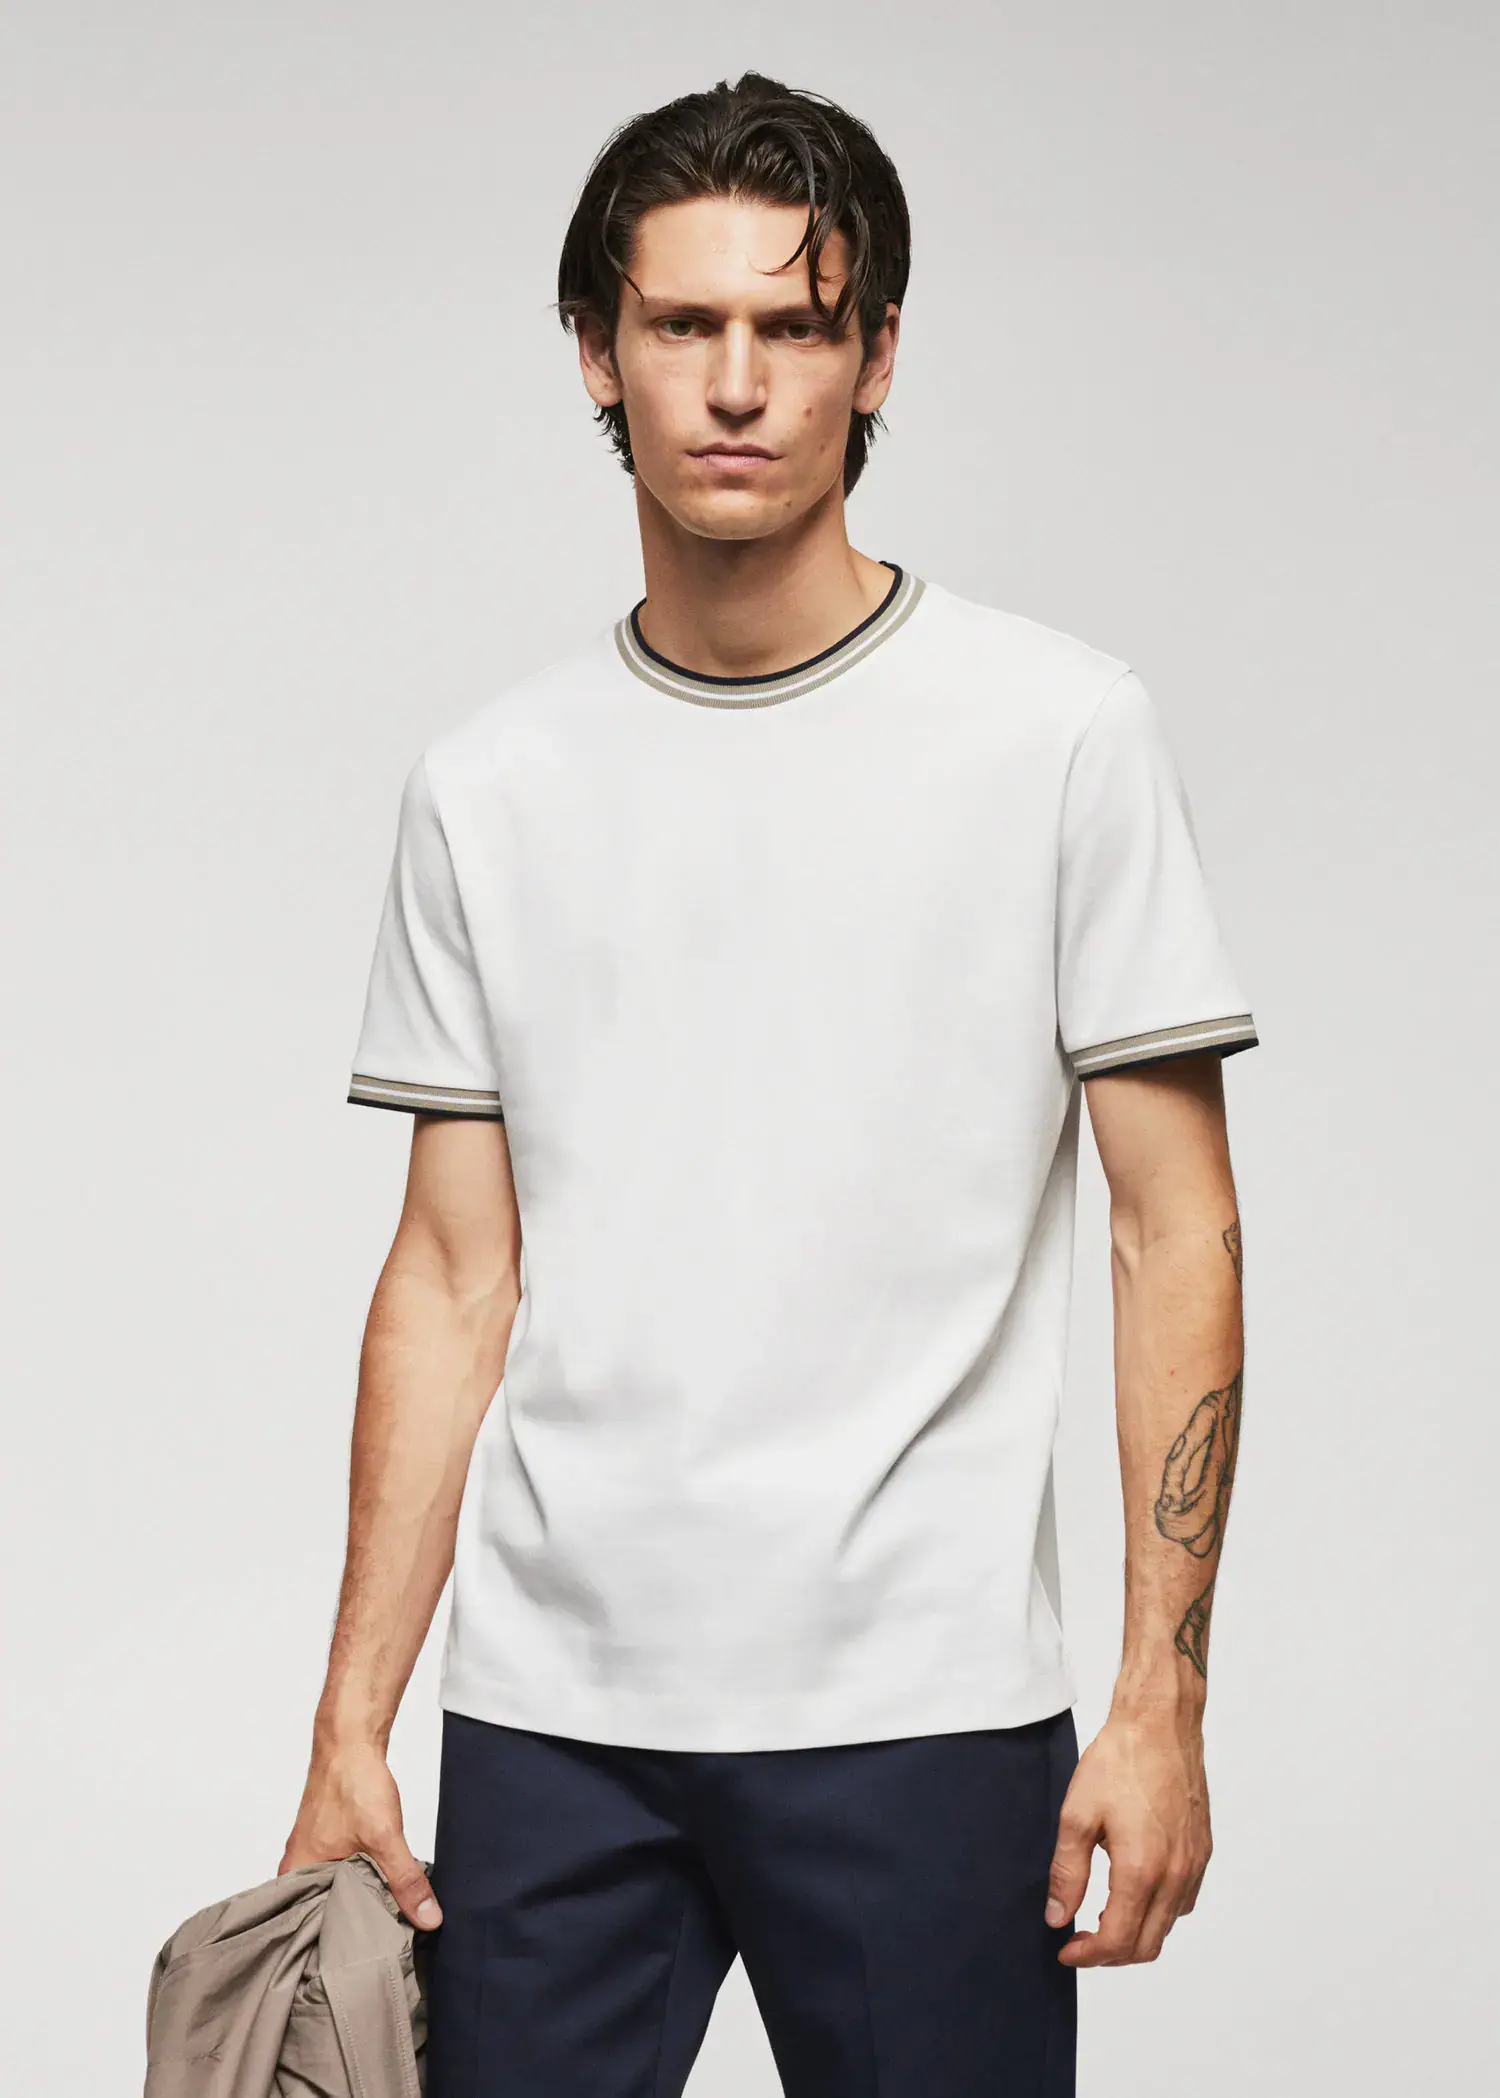 Mango 100% cotton t-shirt with contrast piping. a man wearing a white t-shirt and a tattoo. 